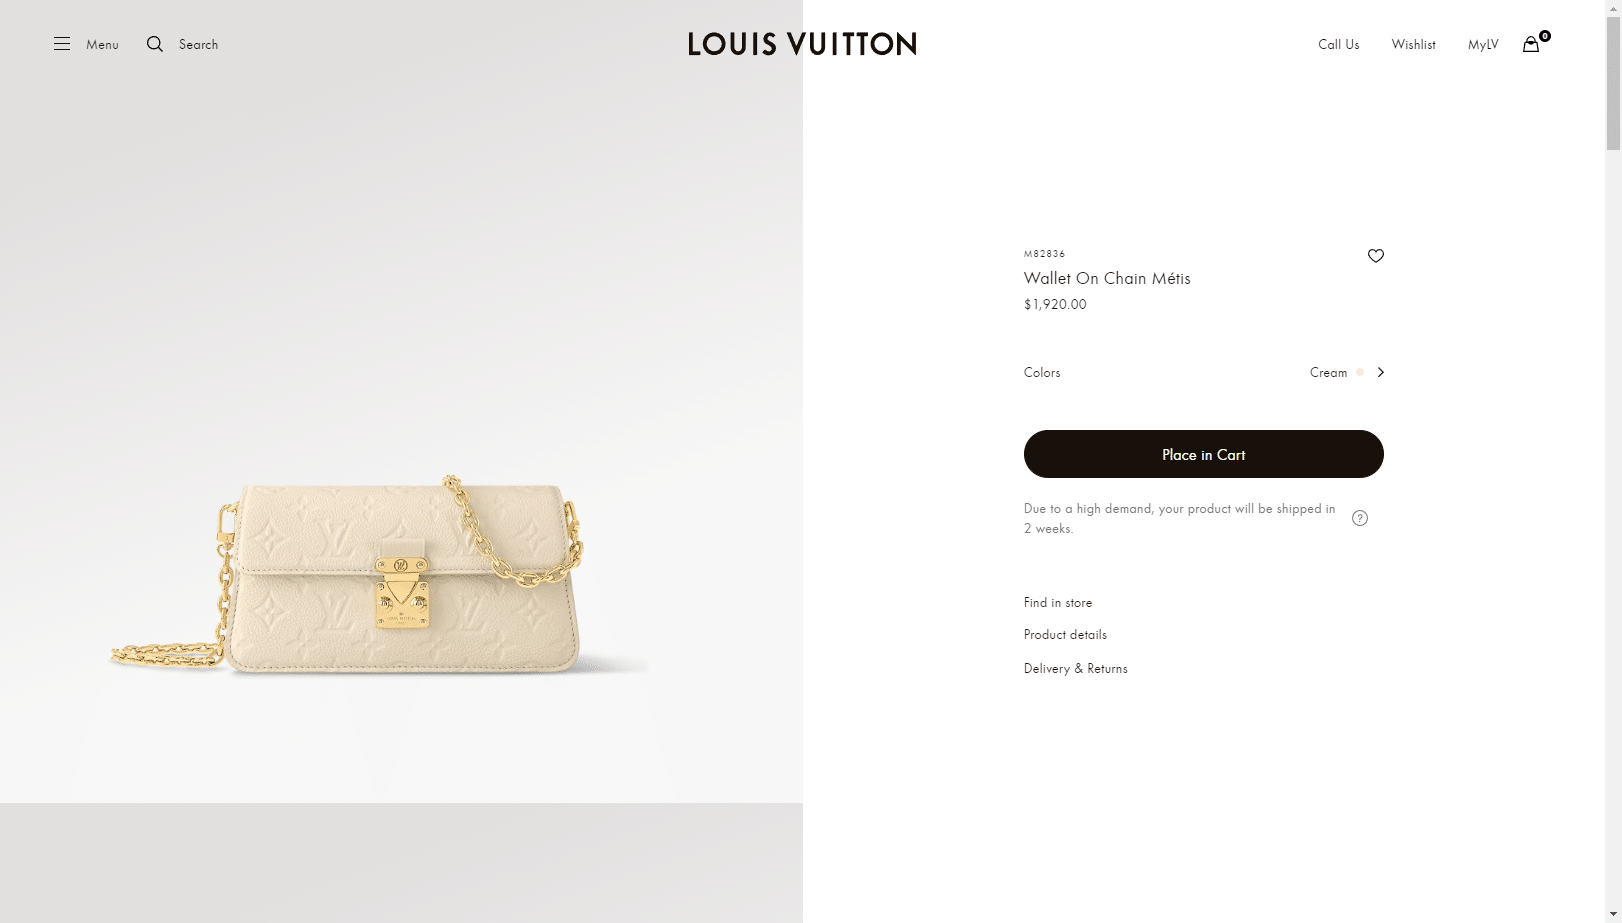 Wallet-On-Chain-Metis-Monogram-Empreinte-Leather-Women-Small-Leather-Goods-LOUIS-VUITTON-.png